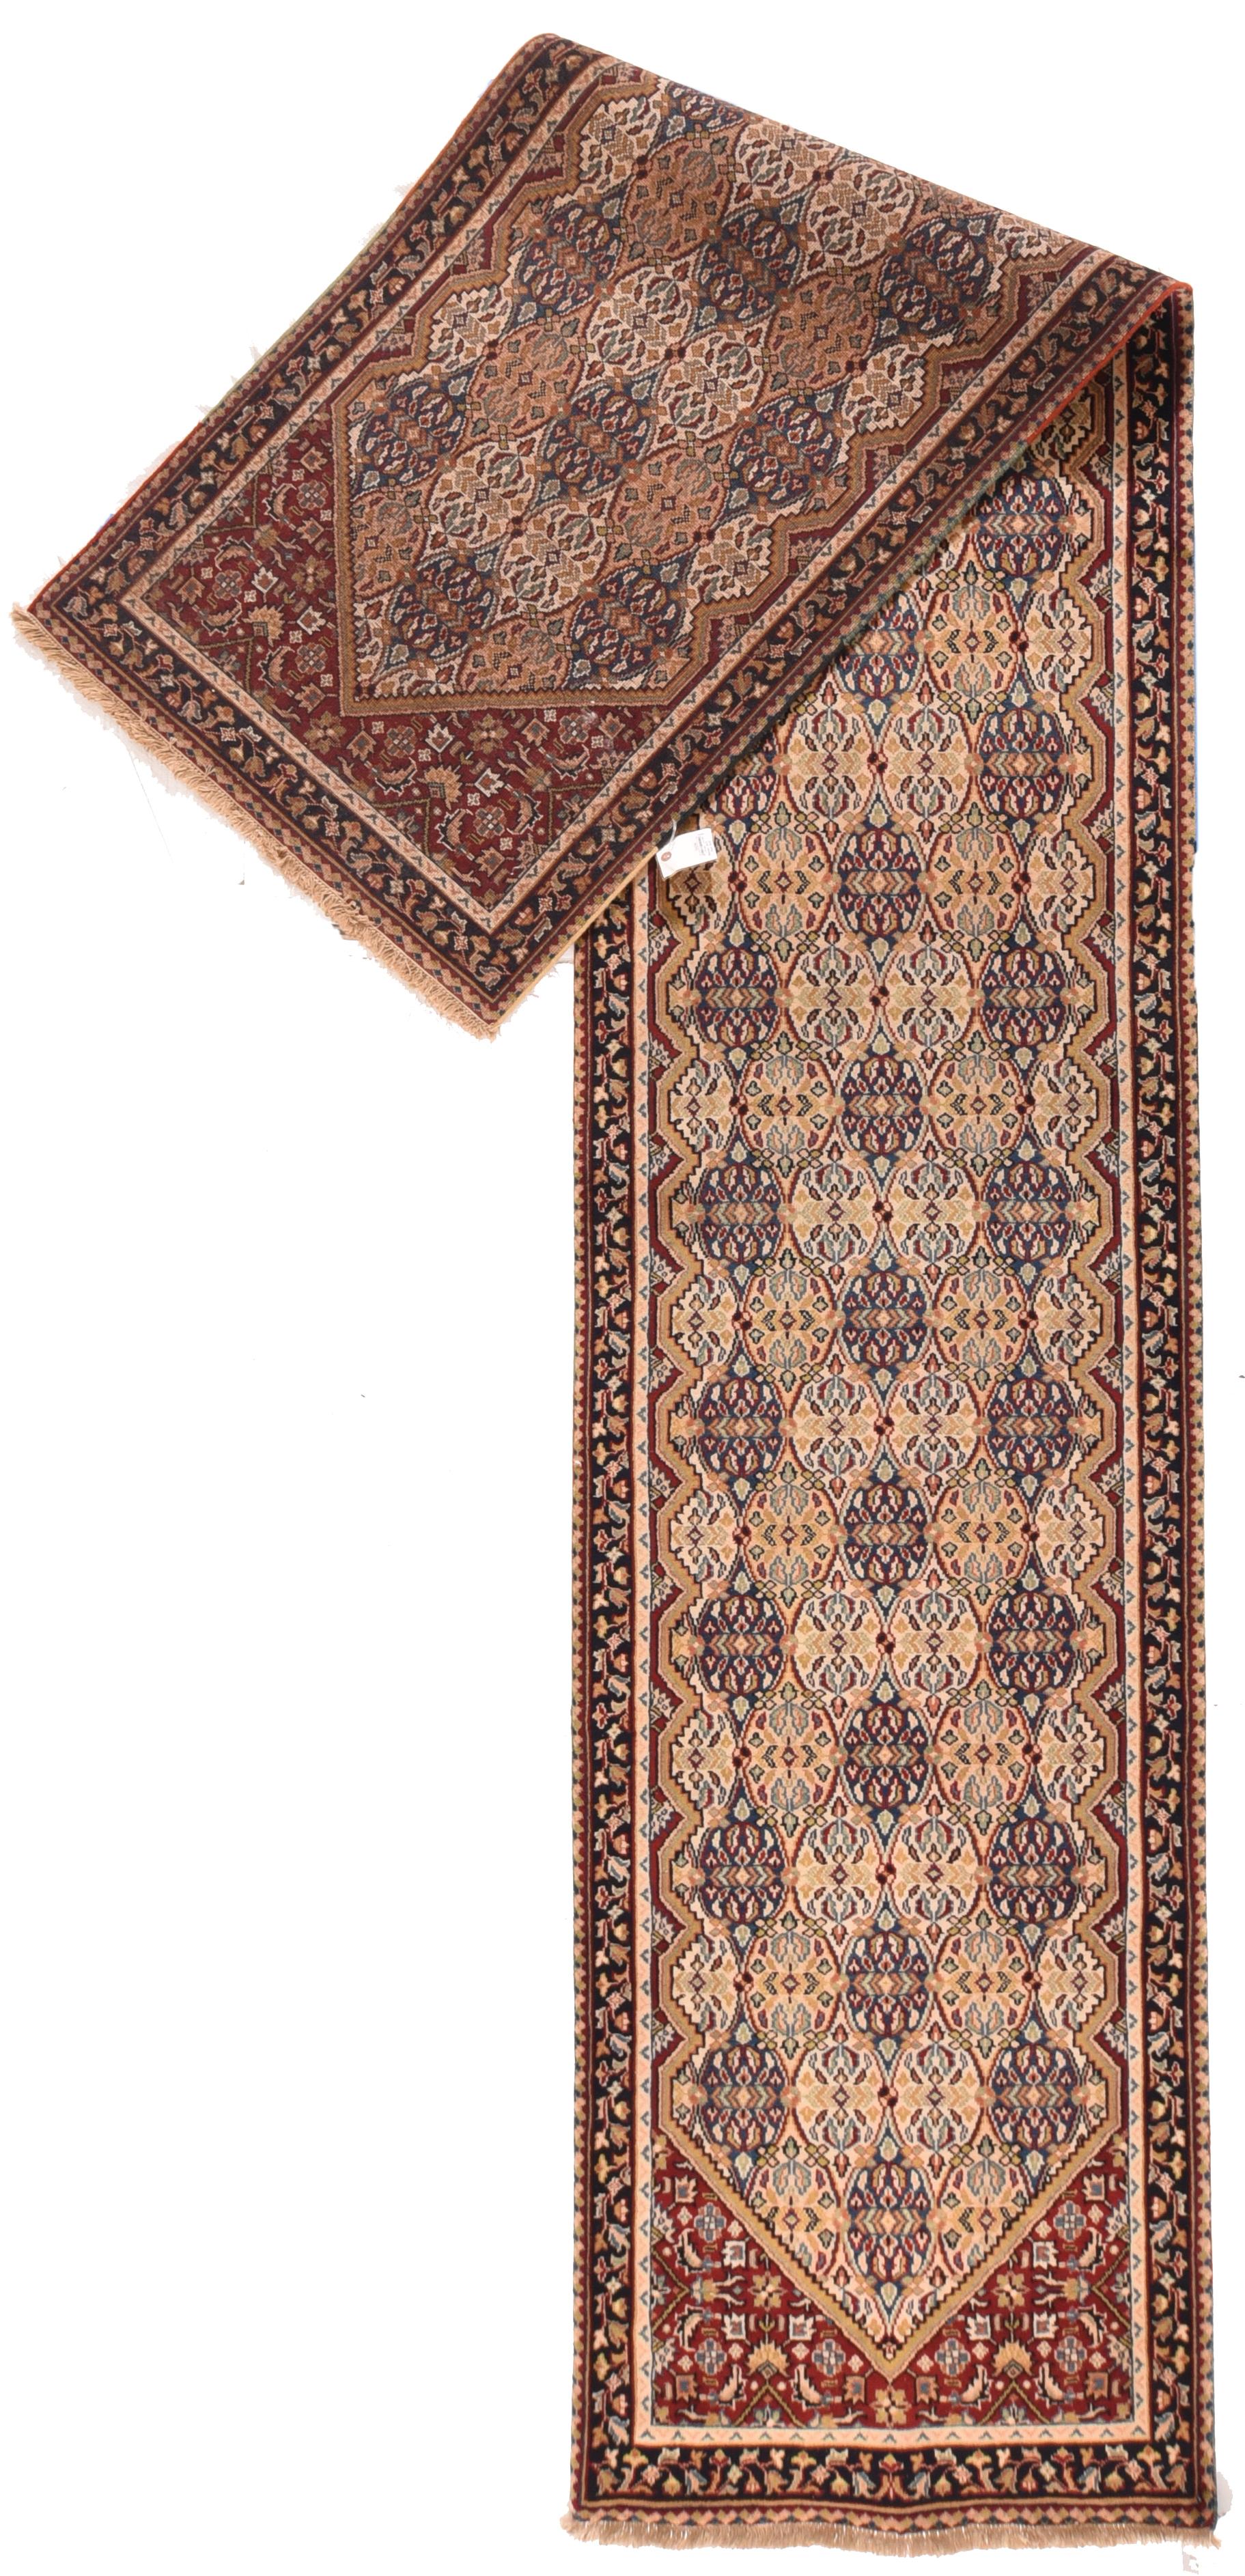 This moderately coarse rustic kenare (runner) shows a kilim-style rendition of an ogival trellis in blue-black straw and ecru. In each reserve is a reflected abstract flower motif. Navy-black corners with leaf and rosette Herati pattern. Navy-black